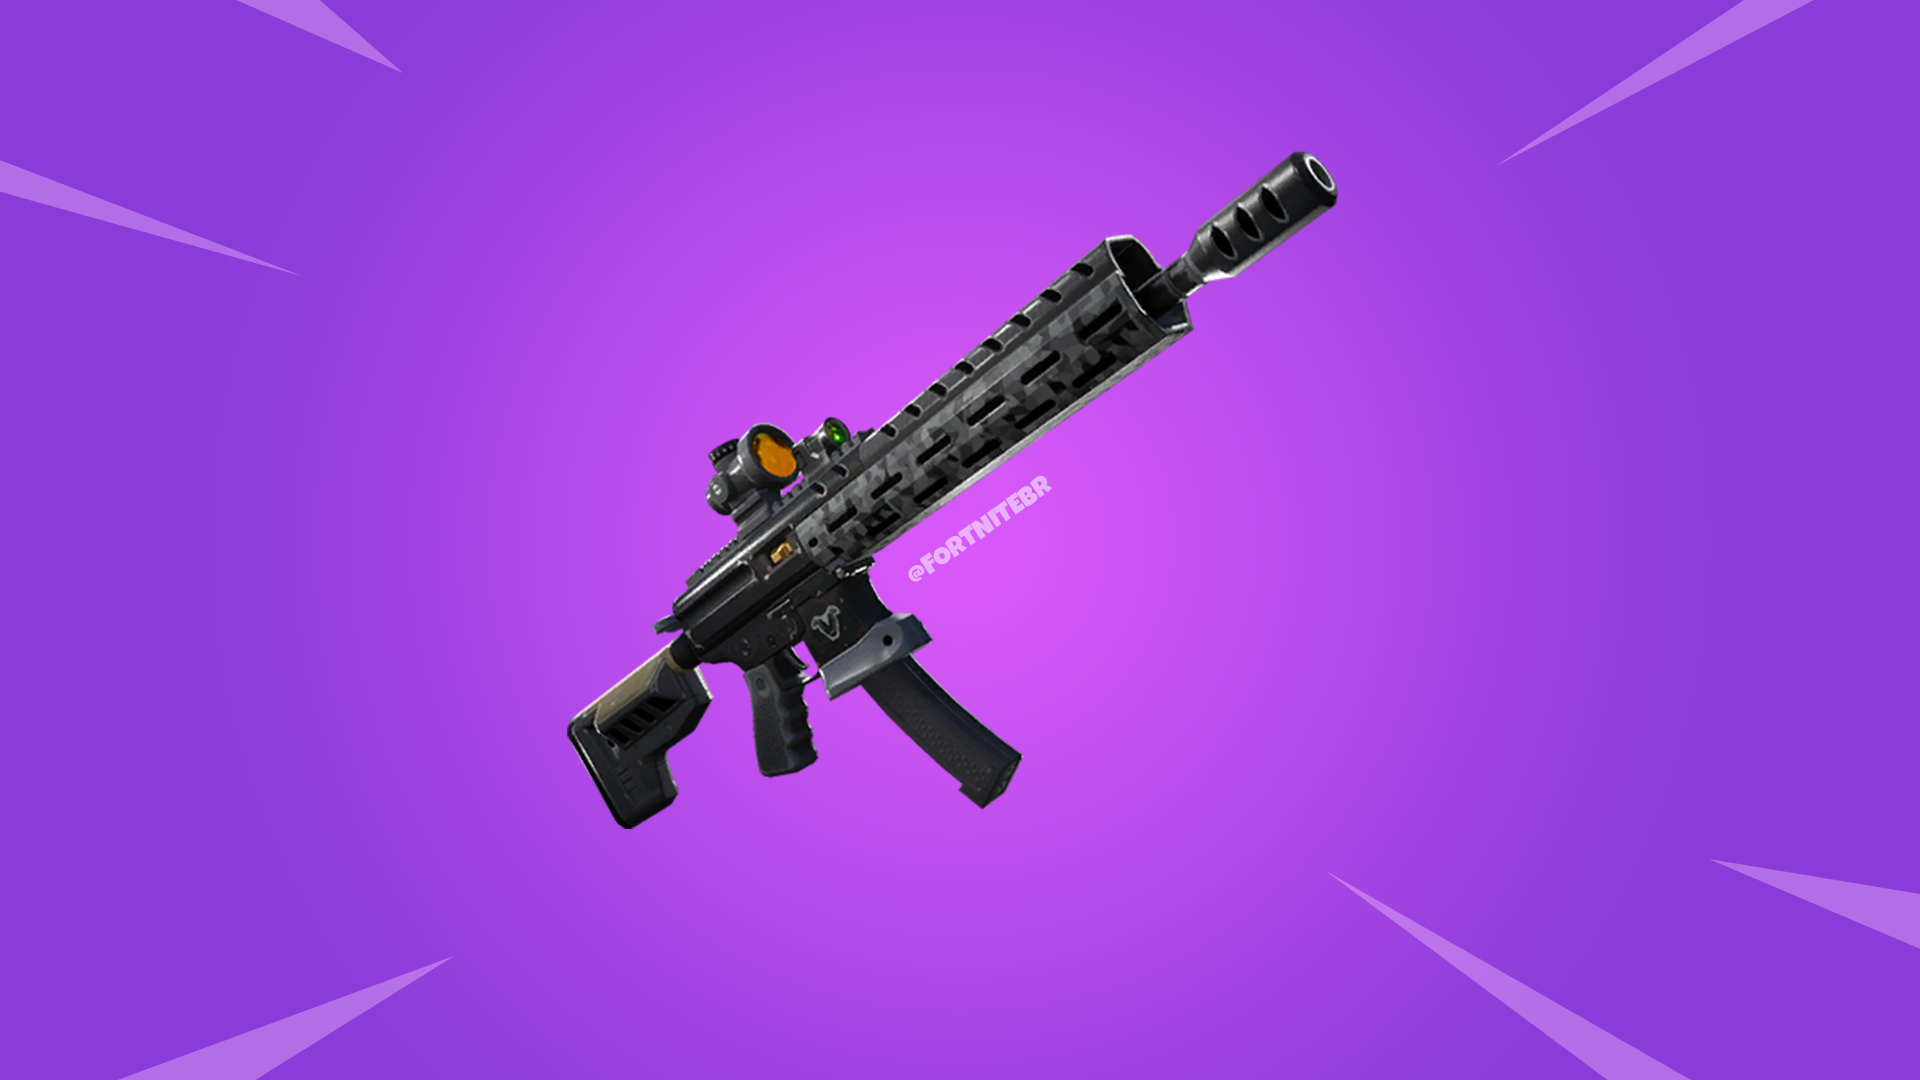 Leak: Tactical Assault Rifle Coming to Fortnite